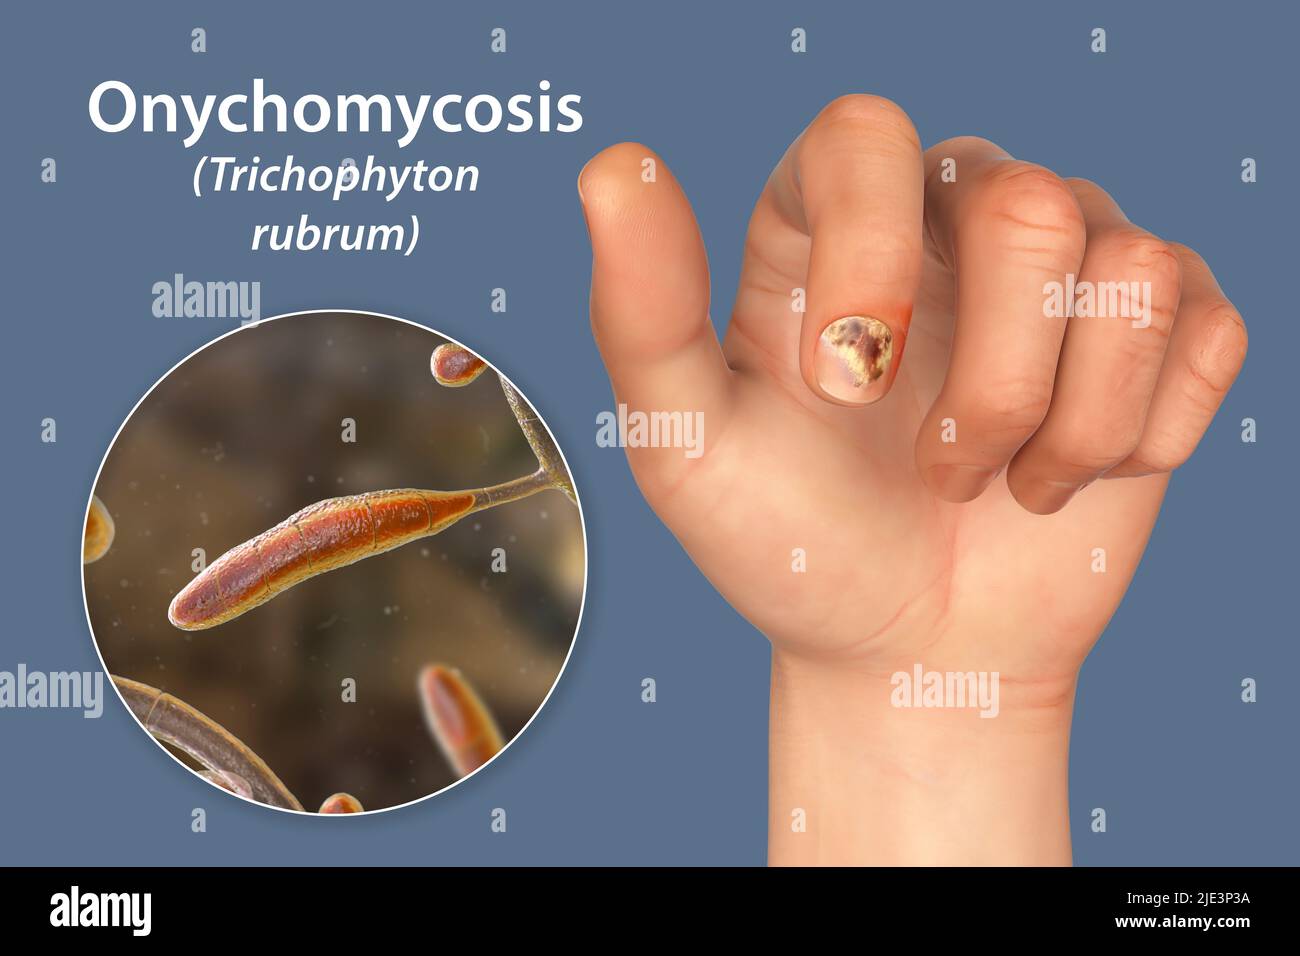 Illustration of a fungal nail infection showing human hand with onychomycosis and close-up view of Trichopyton rubrum fungi, one of the causative agen Stock Photo